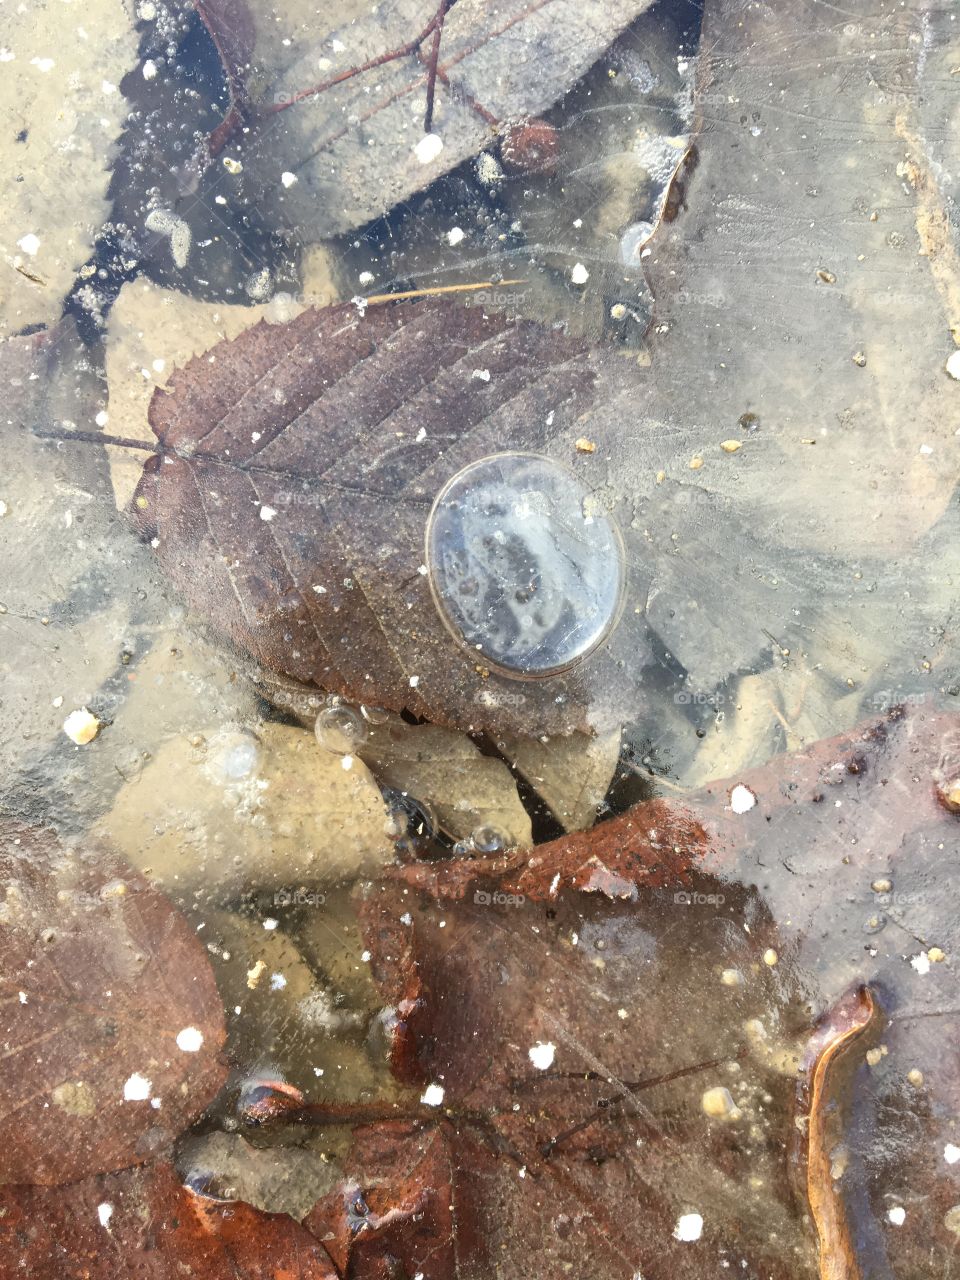 Leaf stuck under frozen puddle of water